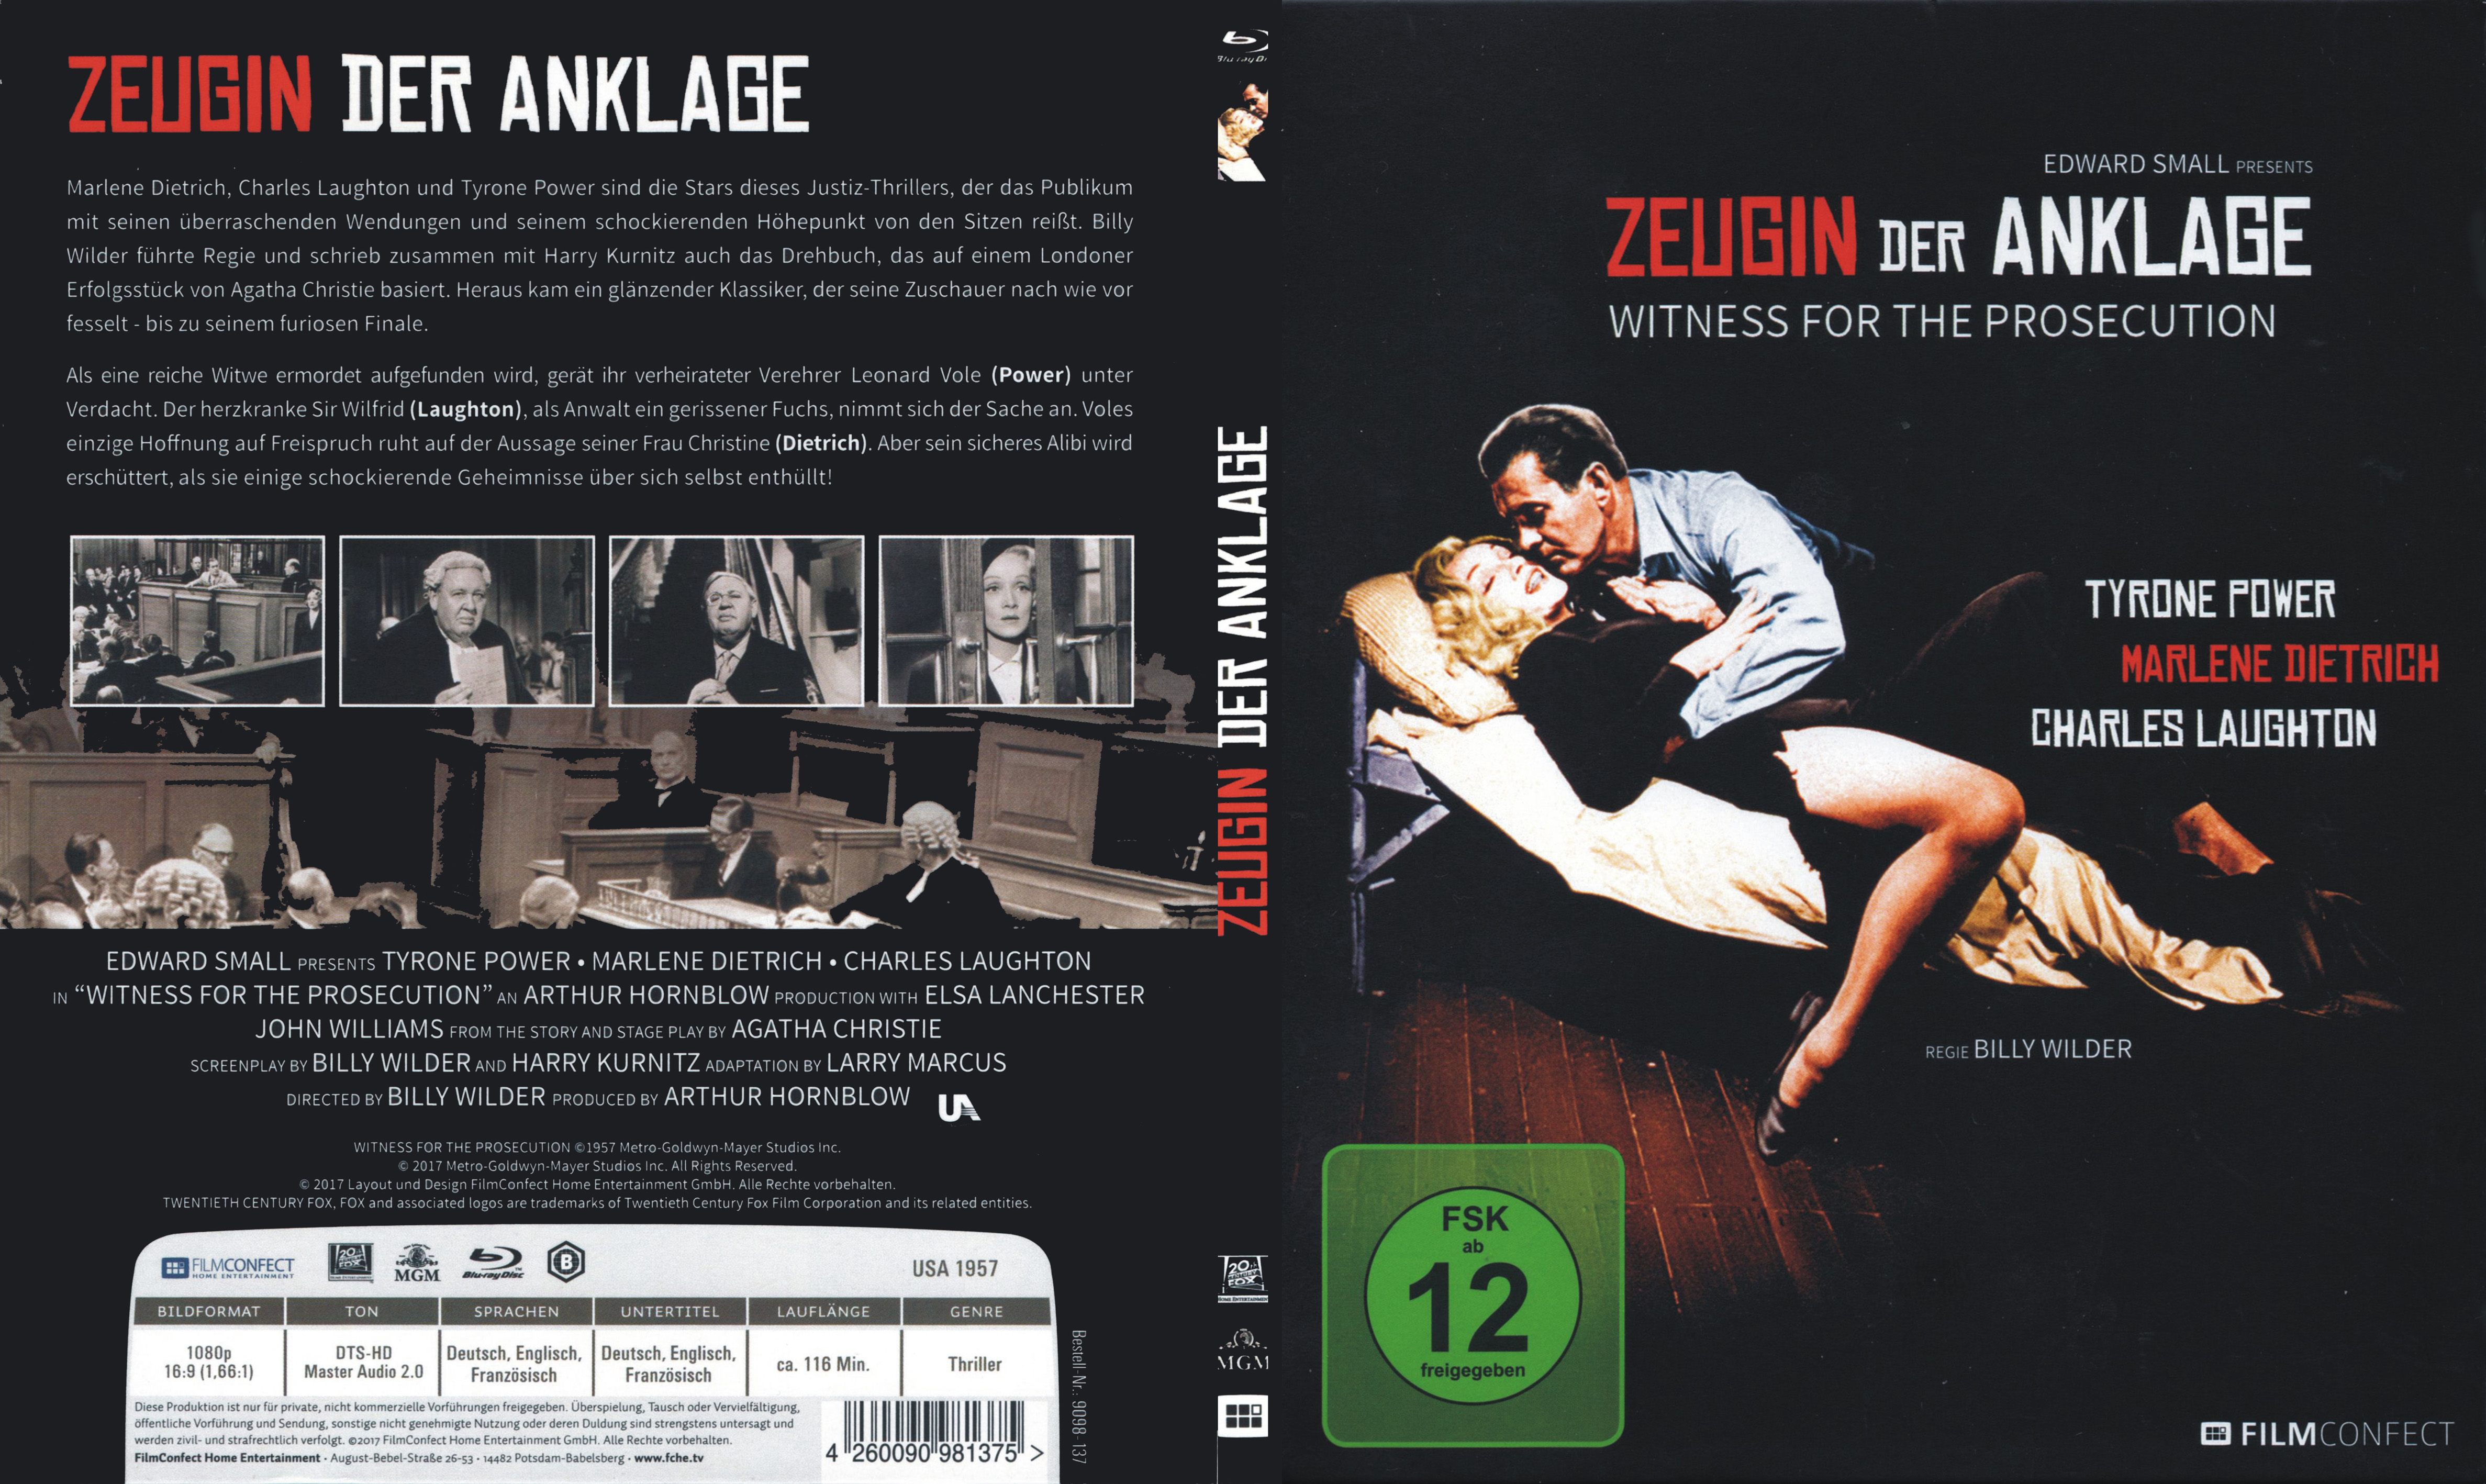 Jaquette DVD Temoin  charge Zone 1 (BLU-RAY)